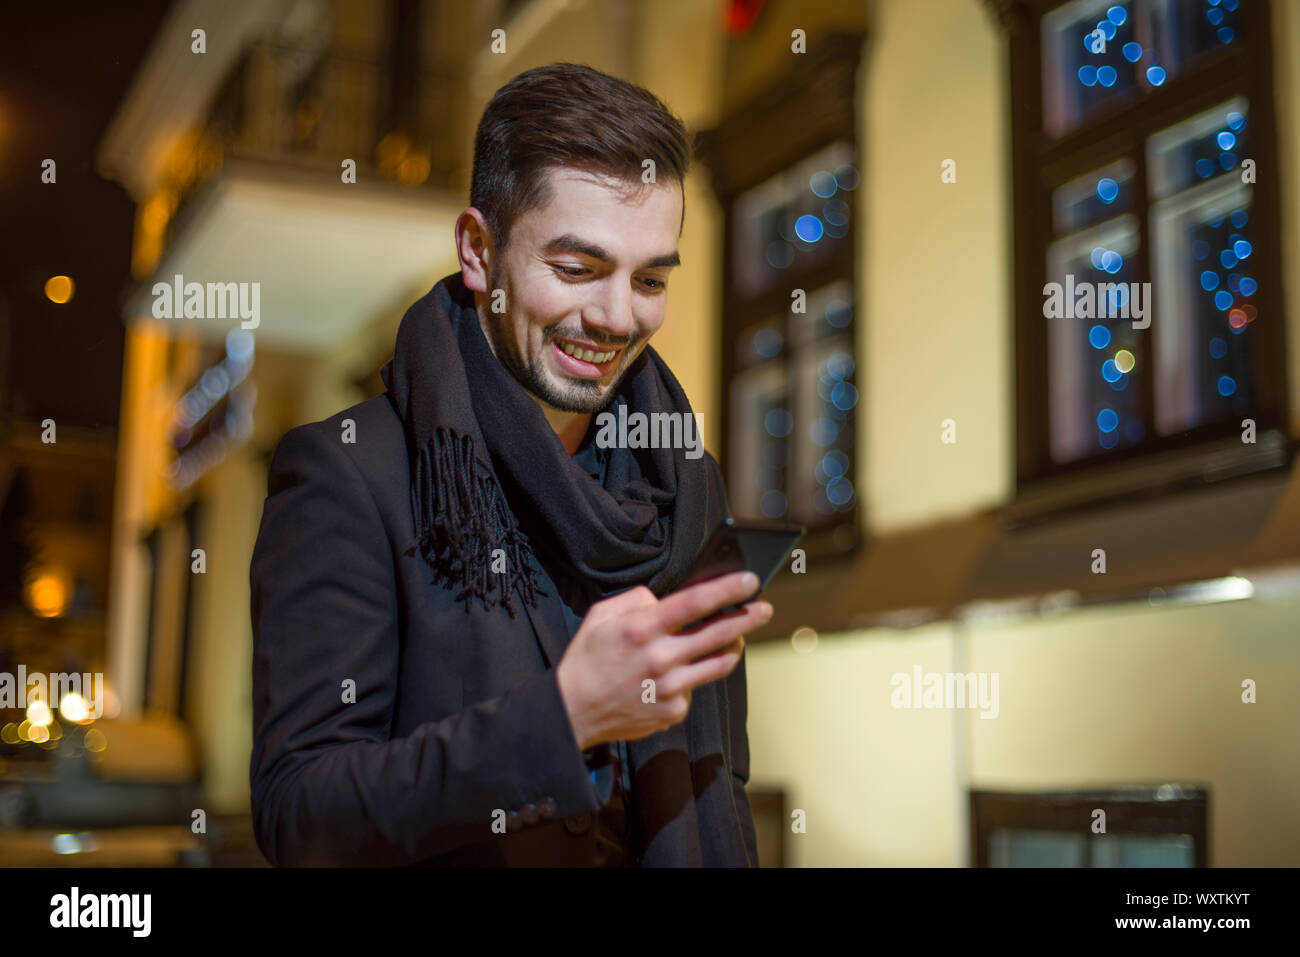 man dressed in business style on the street in the evening looks at the smartphone and smiles. Stock Photo